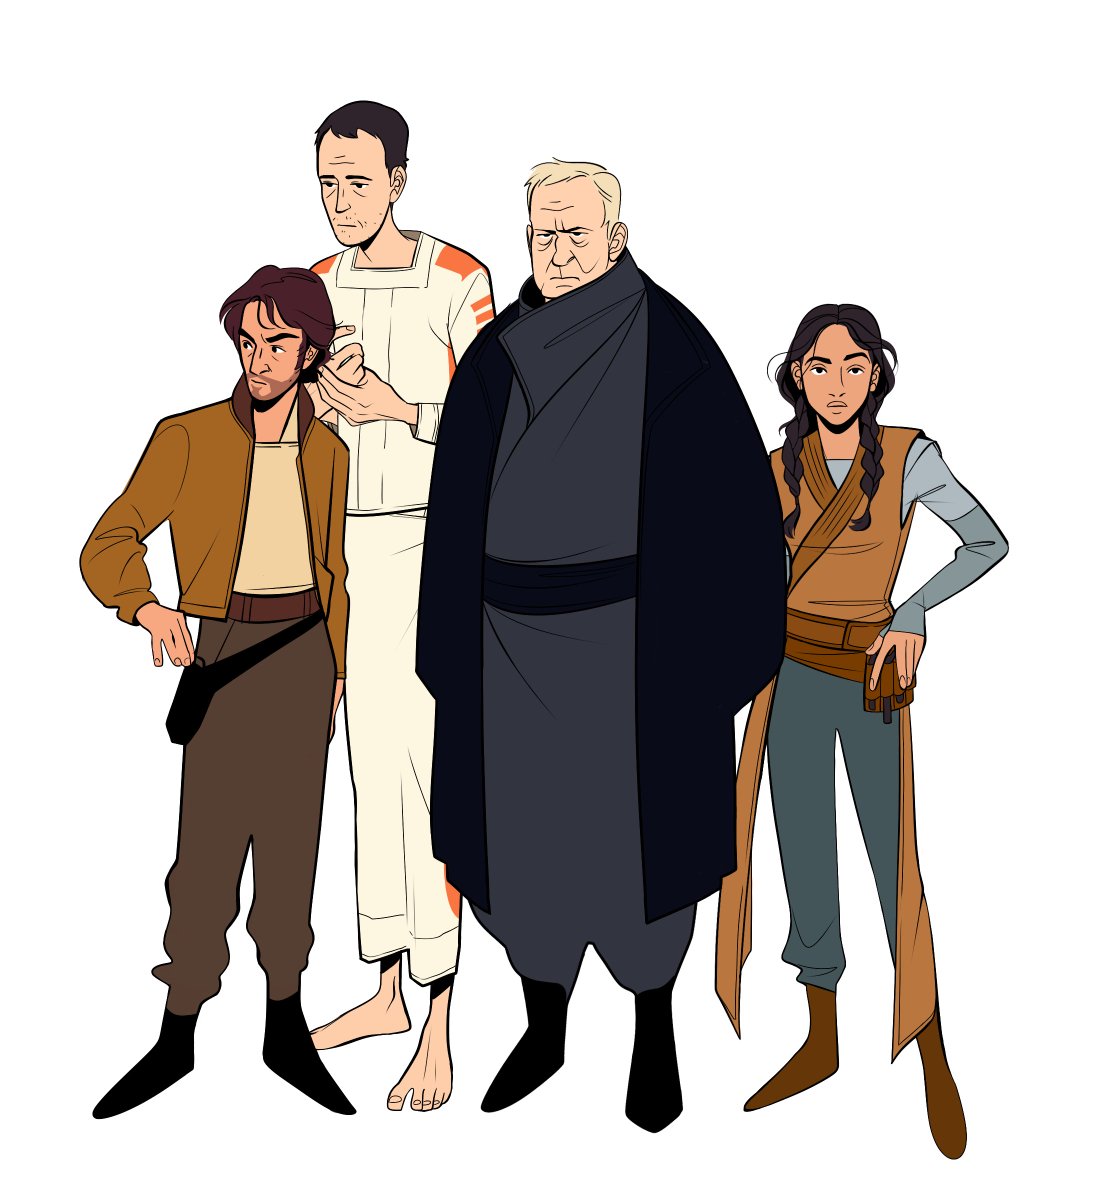 hi #MayThe4th i still think there needs to be #andor comics immediately